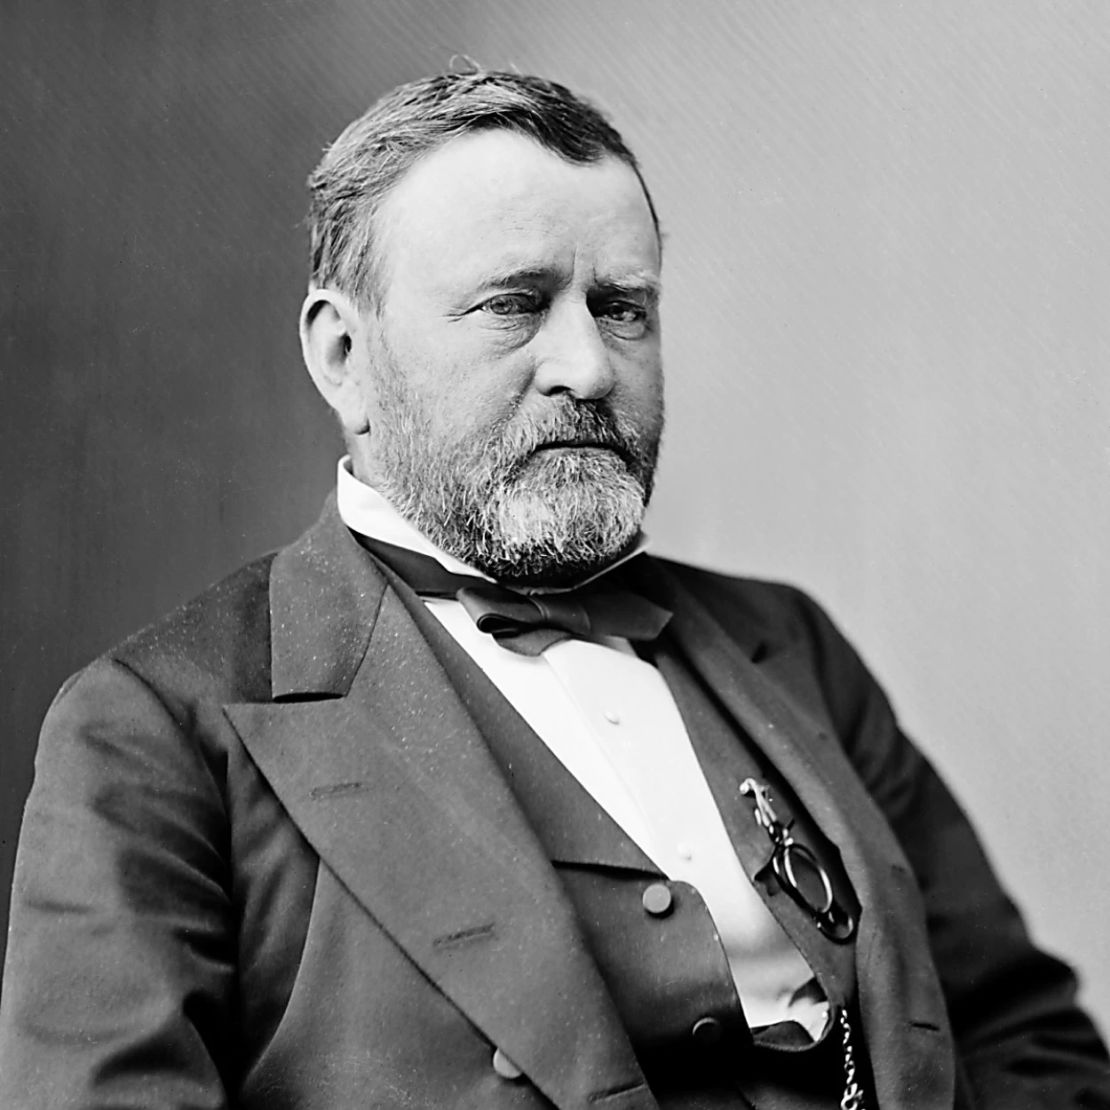 Ulysses S. Grant, 18th President of the United States from 1869 to 1877.